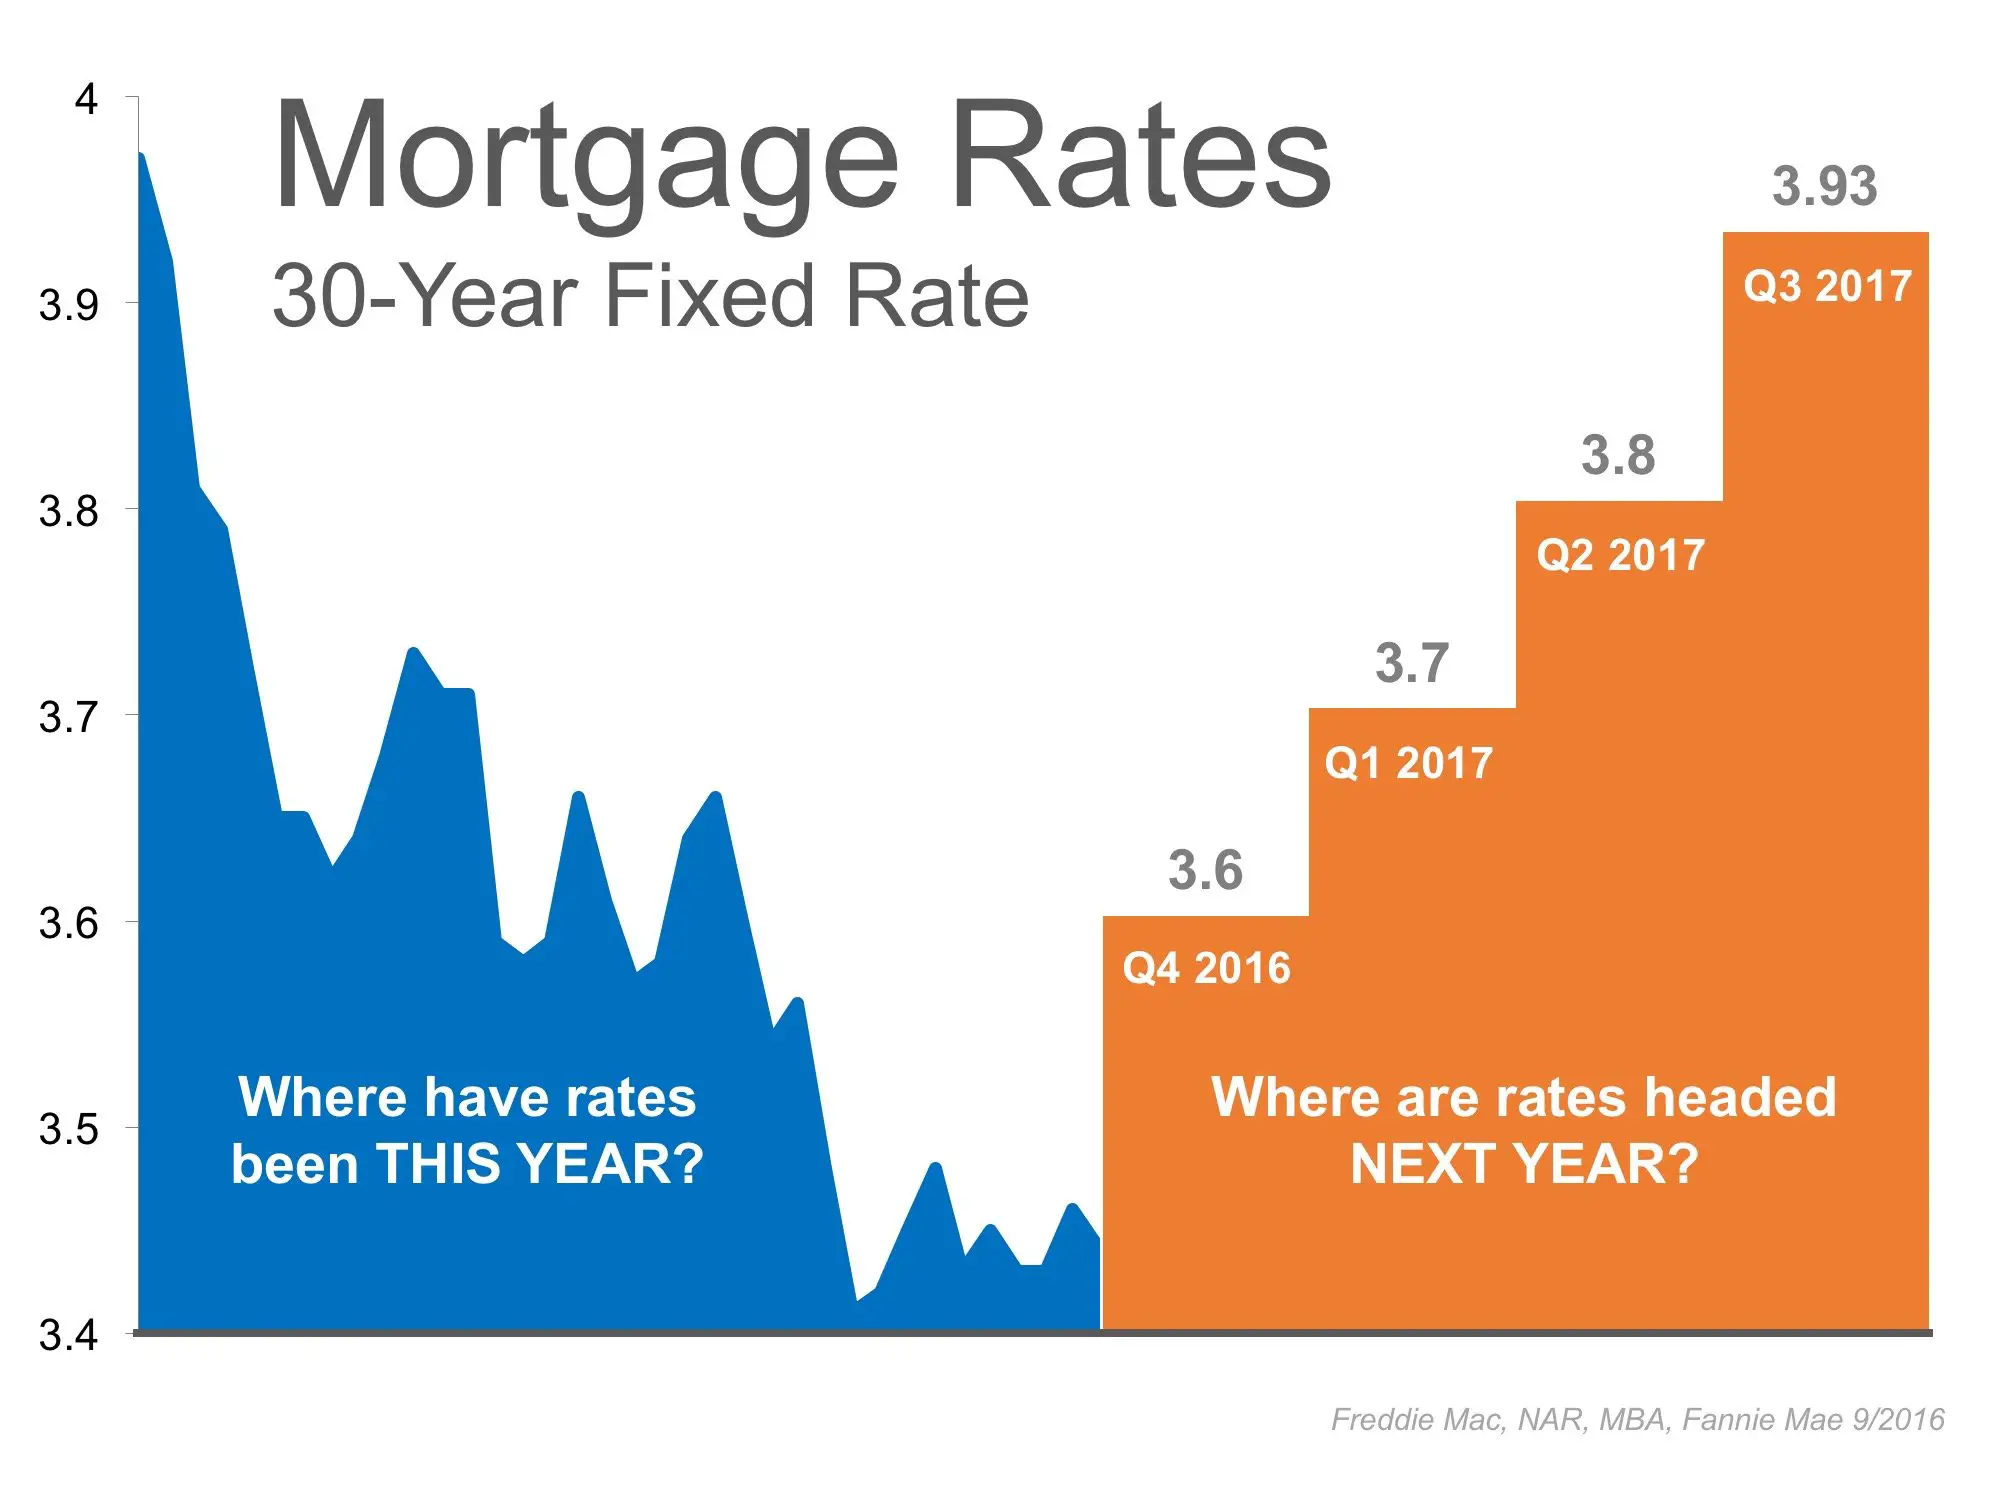 Interest Rates Remain at Historic Lowsâ¦ But for How Long?